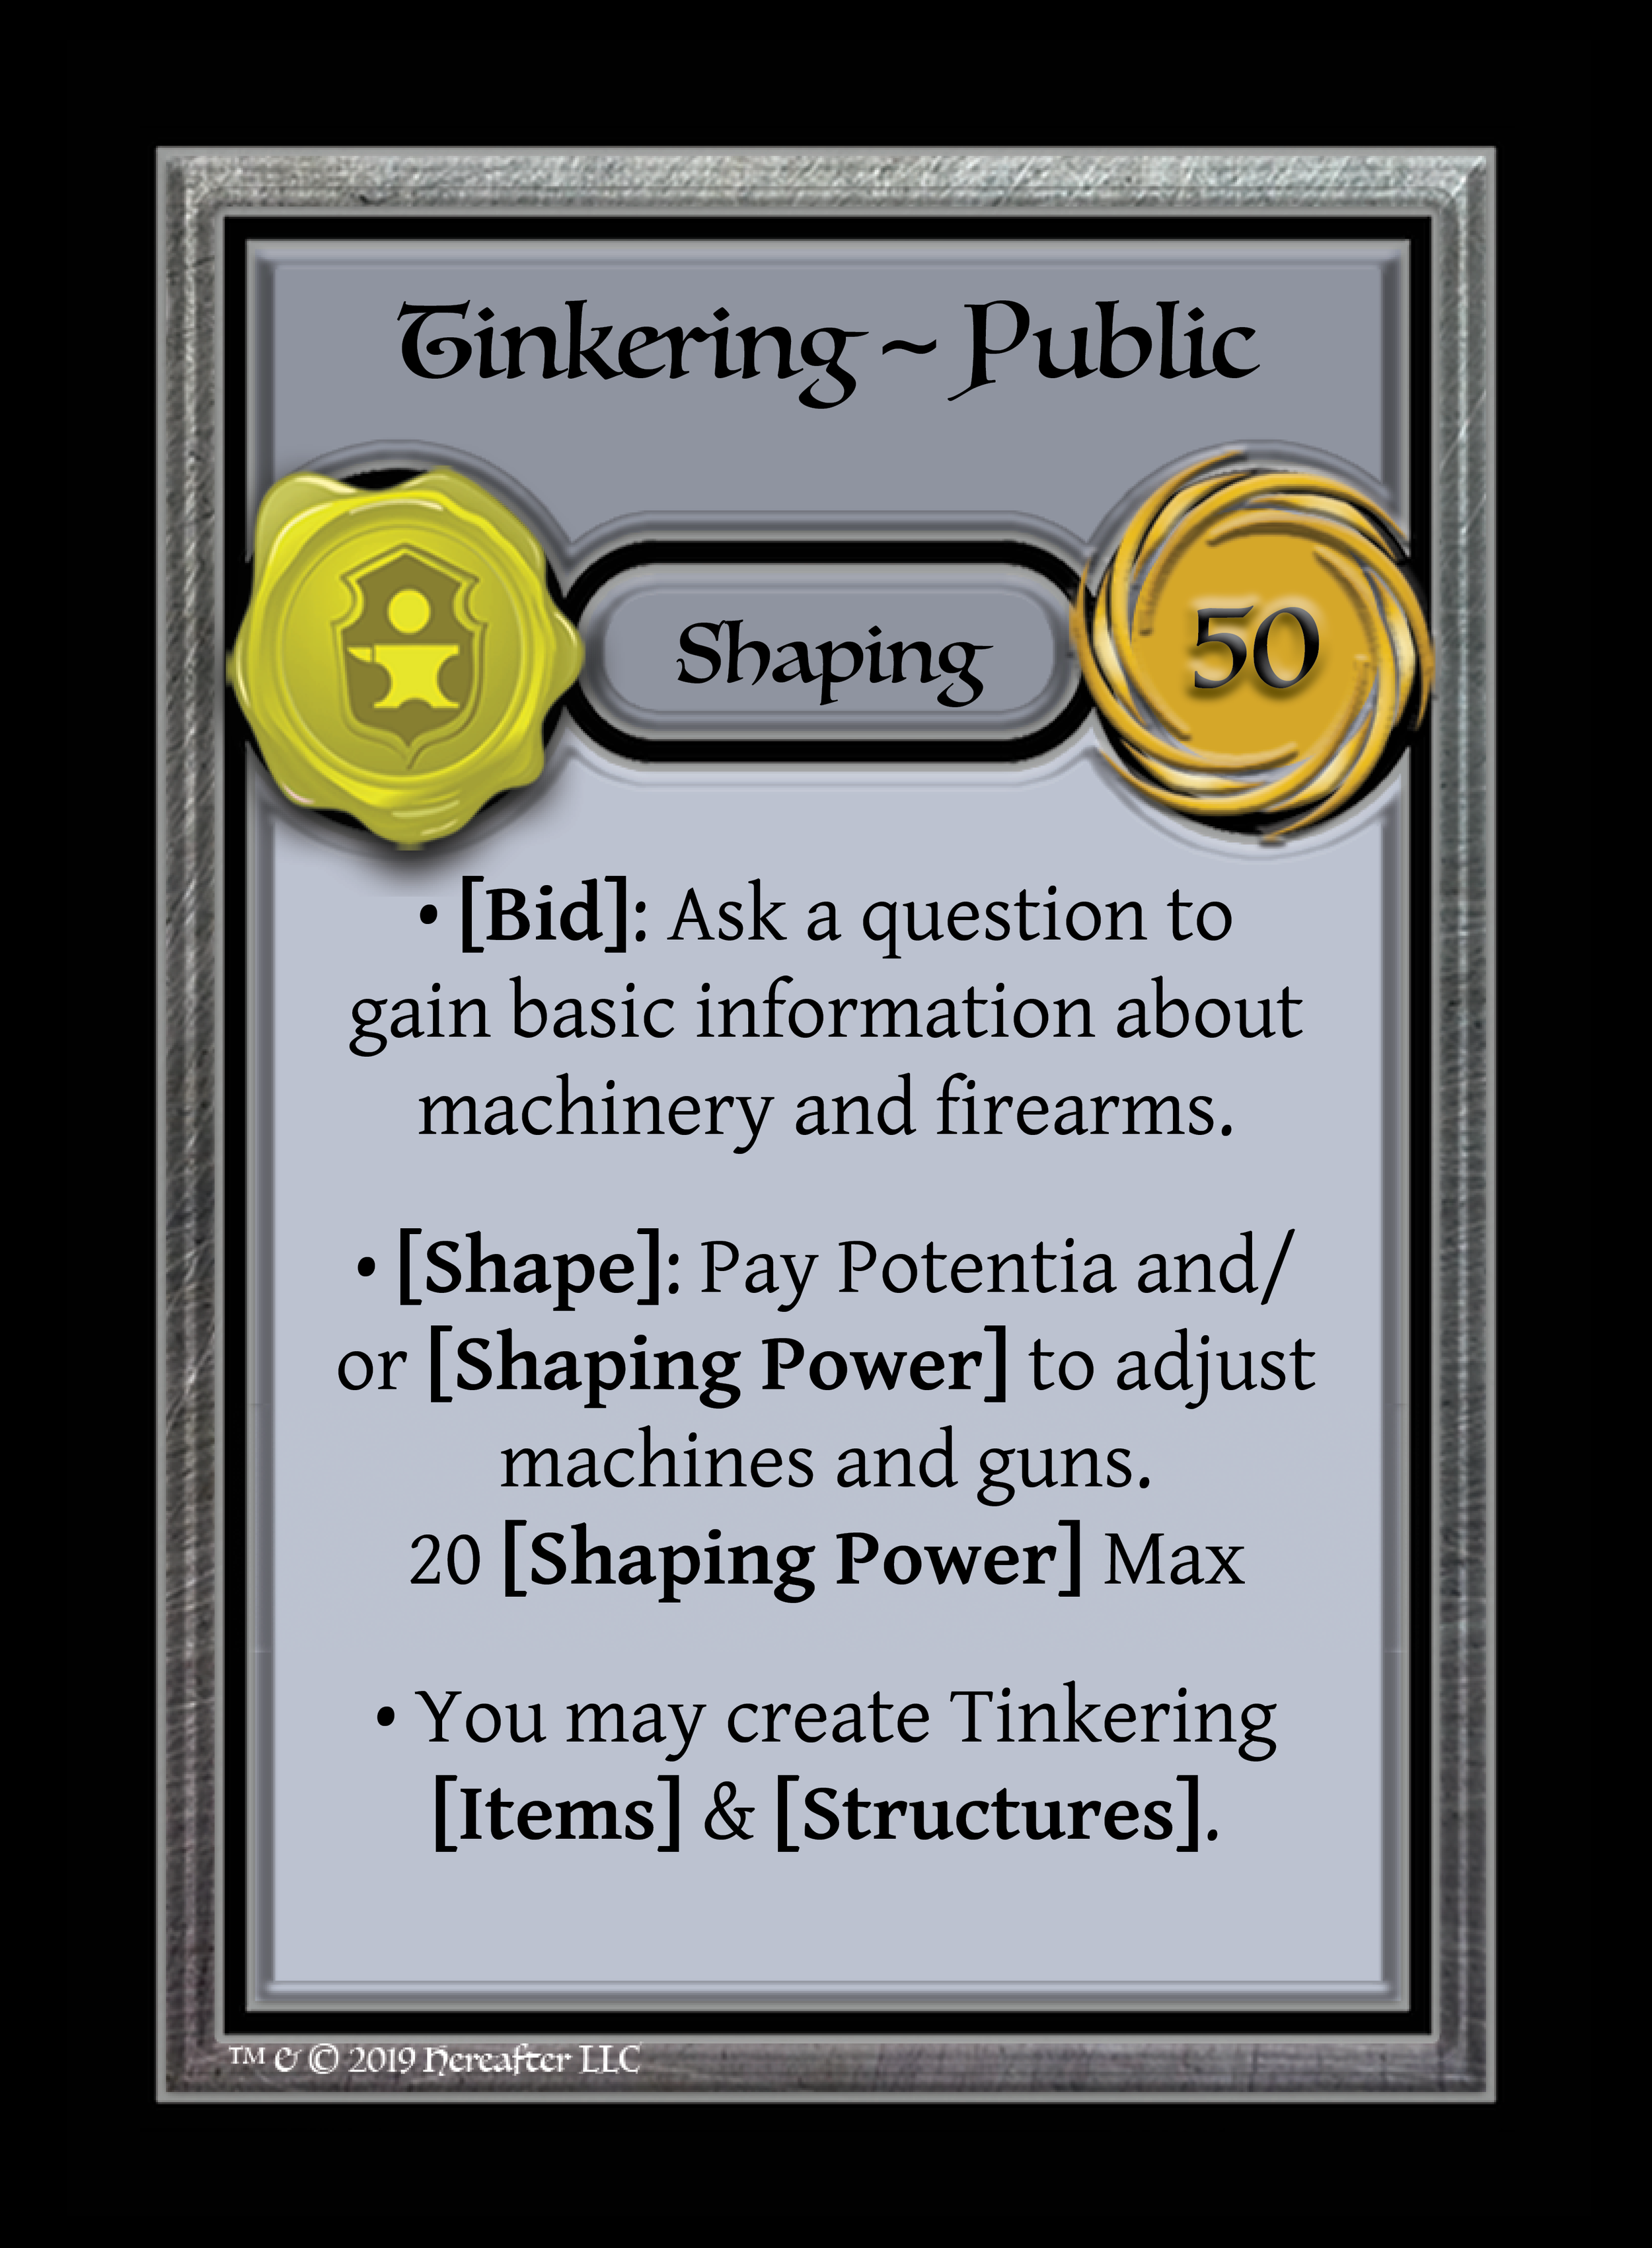 255_Shaping_Tinkering ~ Public_().png